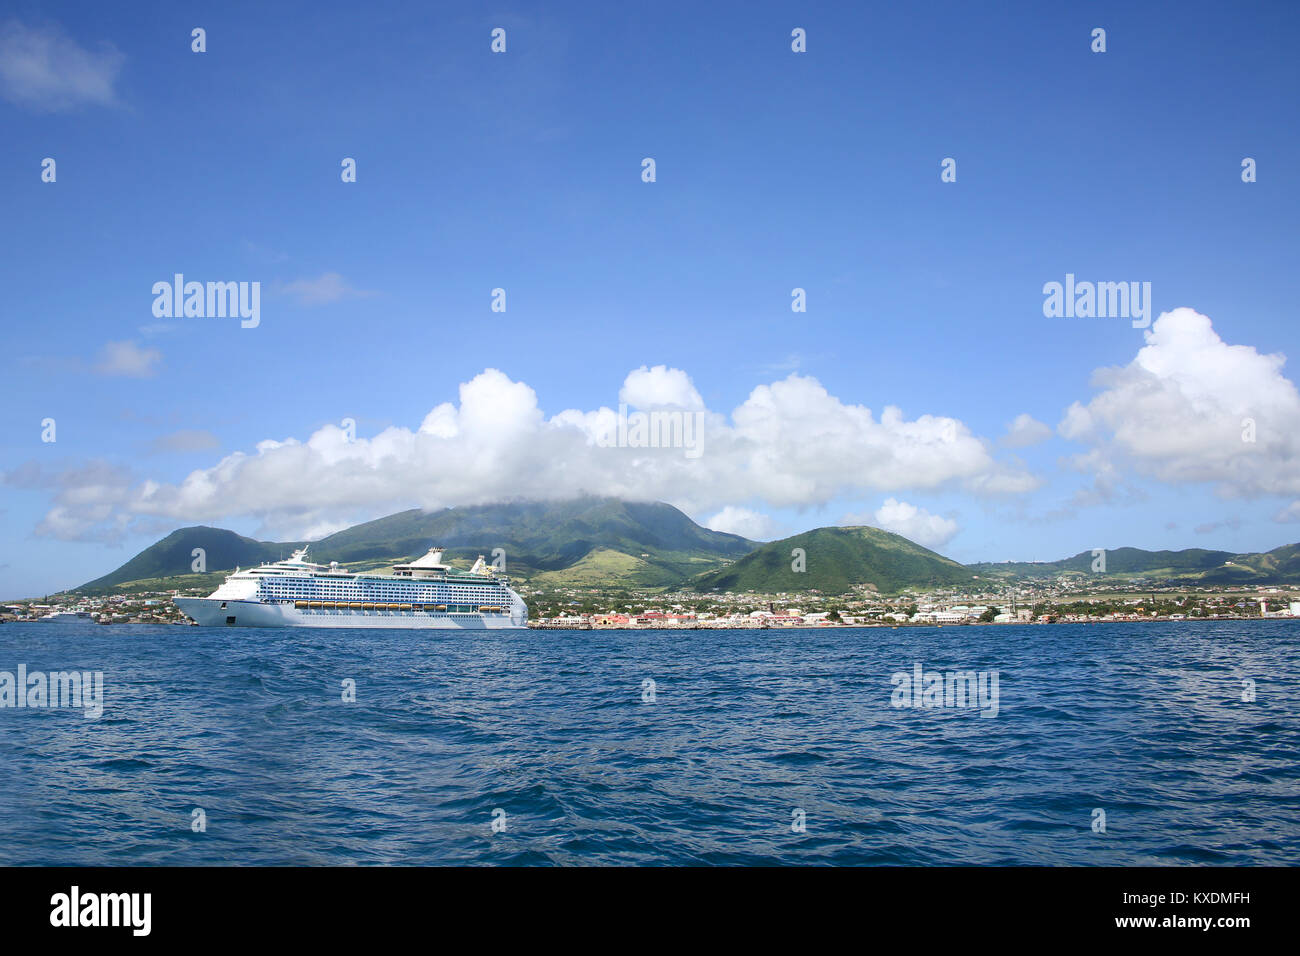 The island of St Kitts, with beautiful landscape & a Cruise ship anchored off the shore, Basseterre, St Kitts, Caribbean. Stock Photo